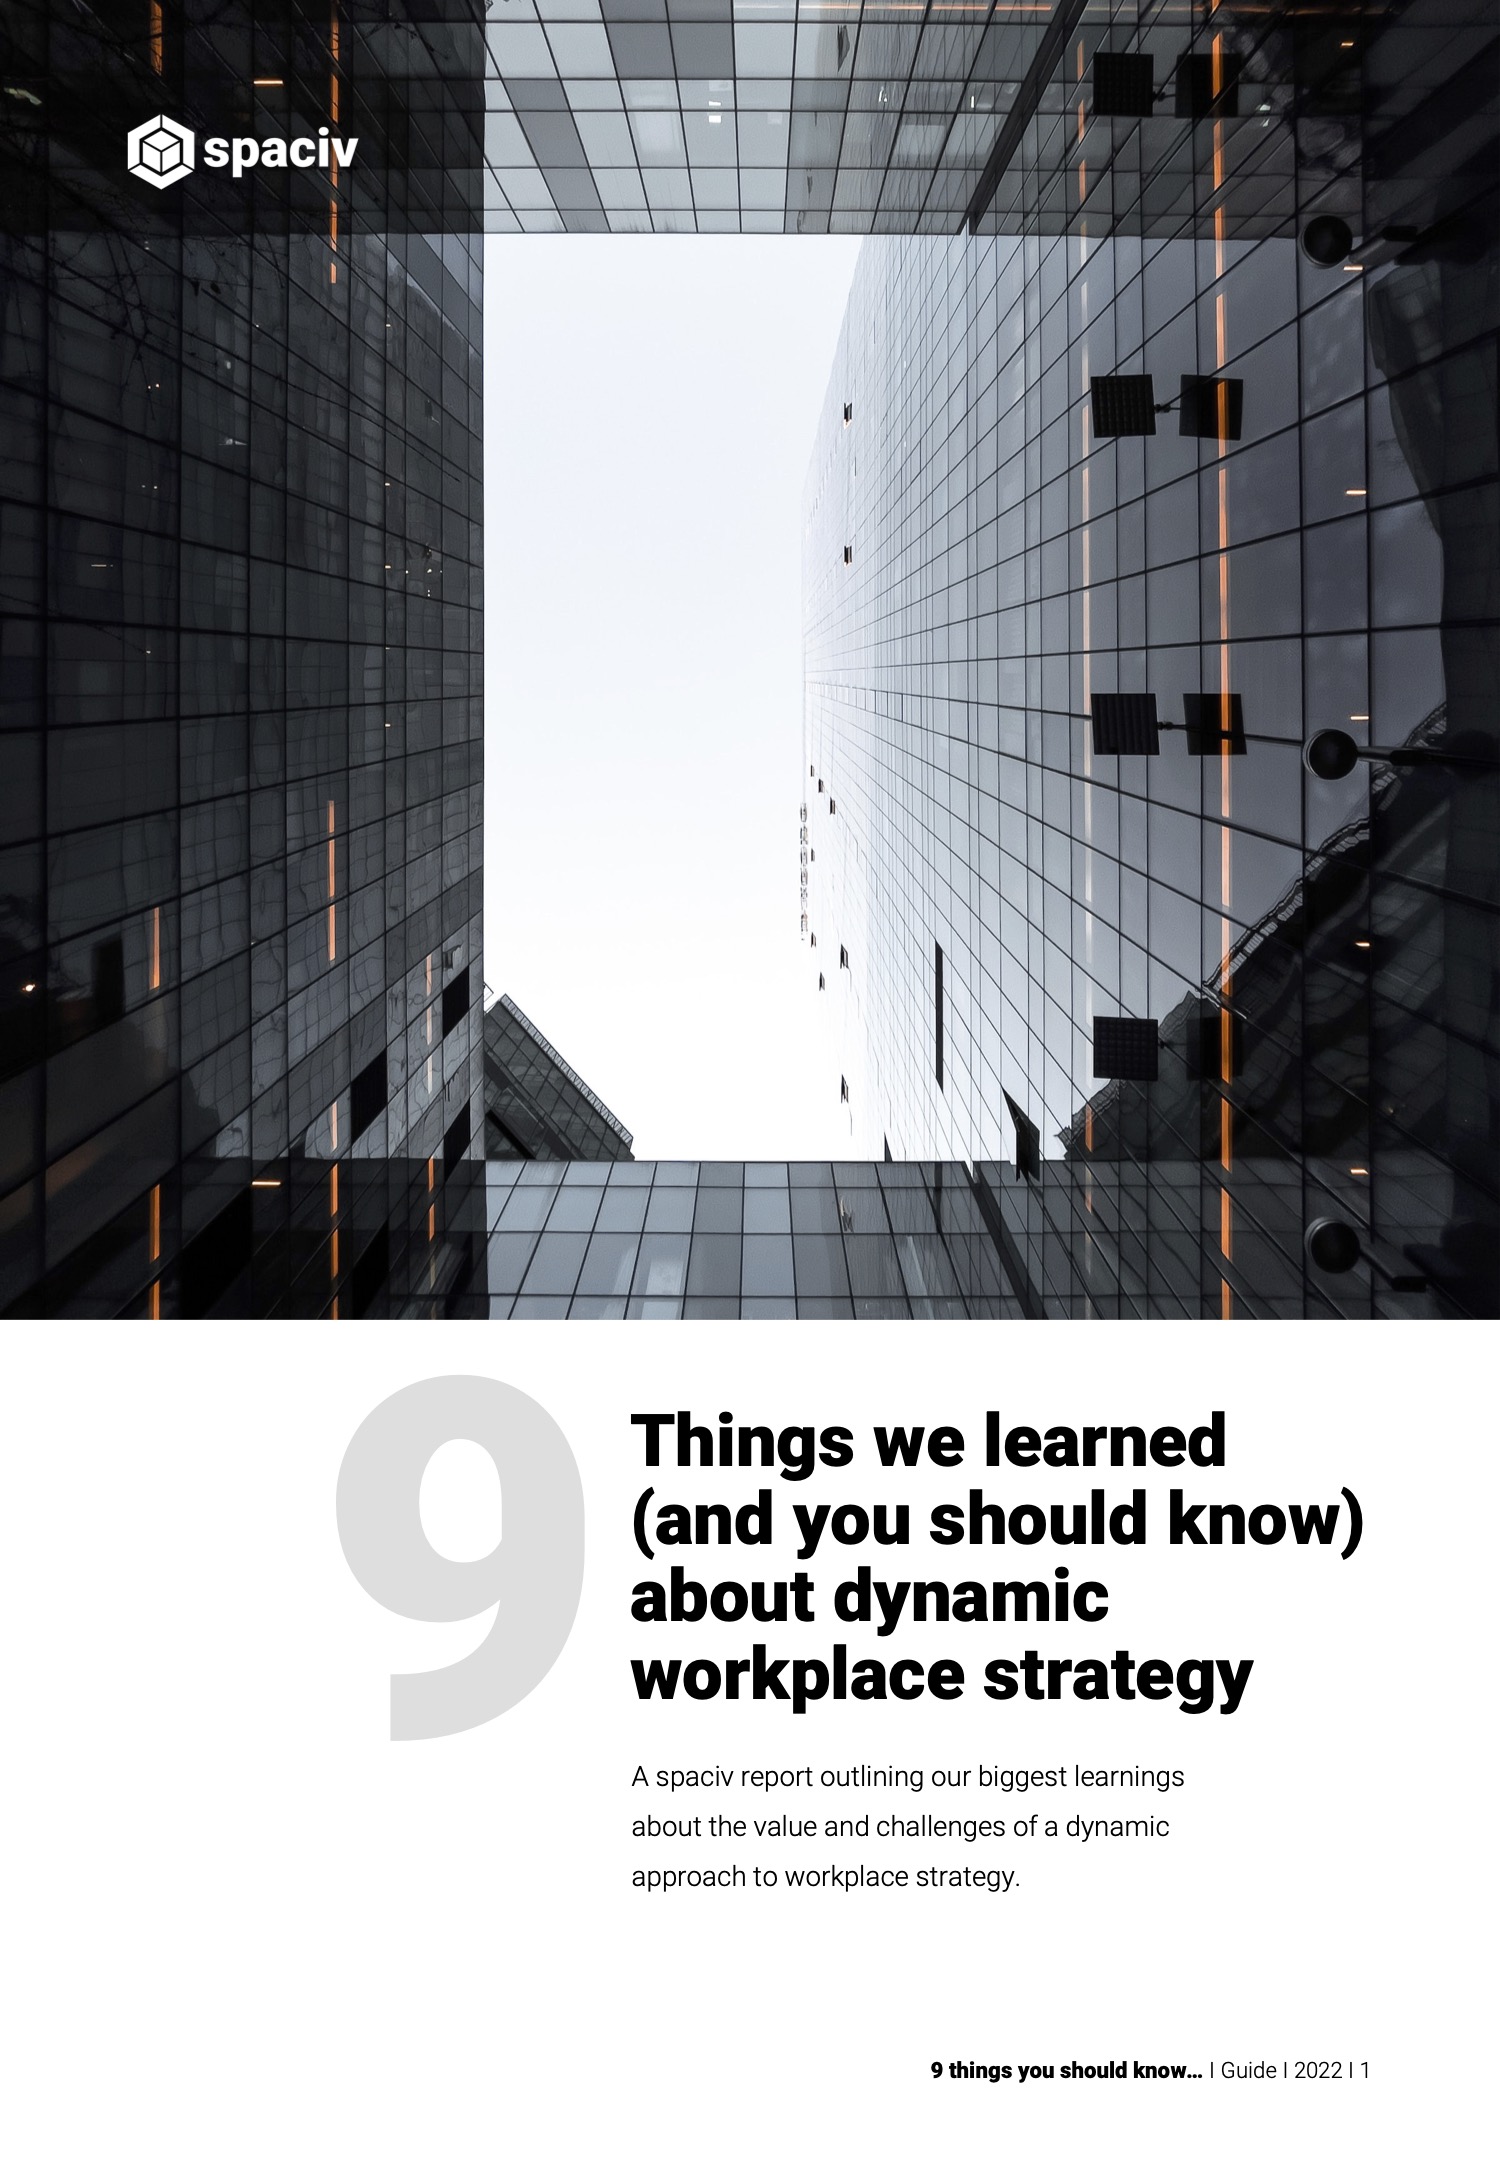 Cover picture of the report: 9 things we learned about dynamic workplace strategy with a view of an office high-rise